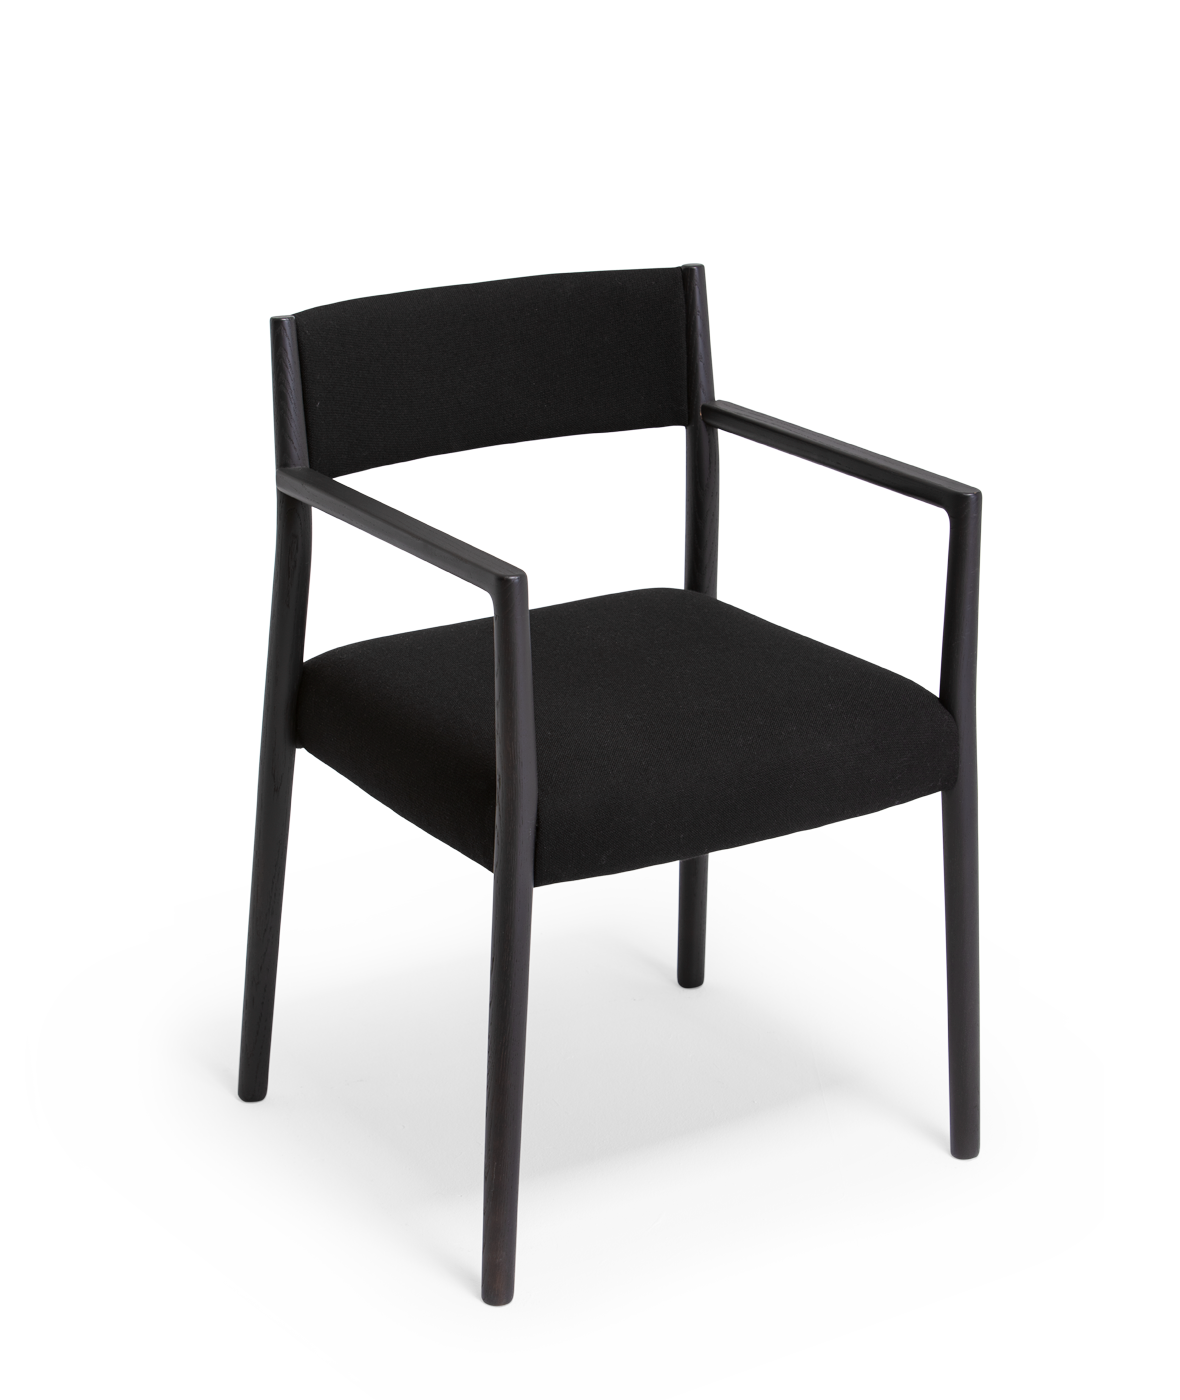 Vergés - Bogart chair with armrests and upholstered seat and backrest